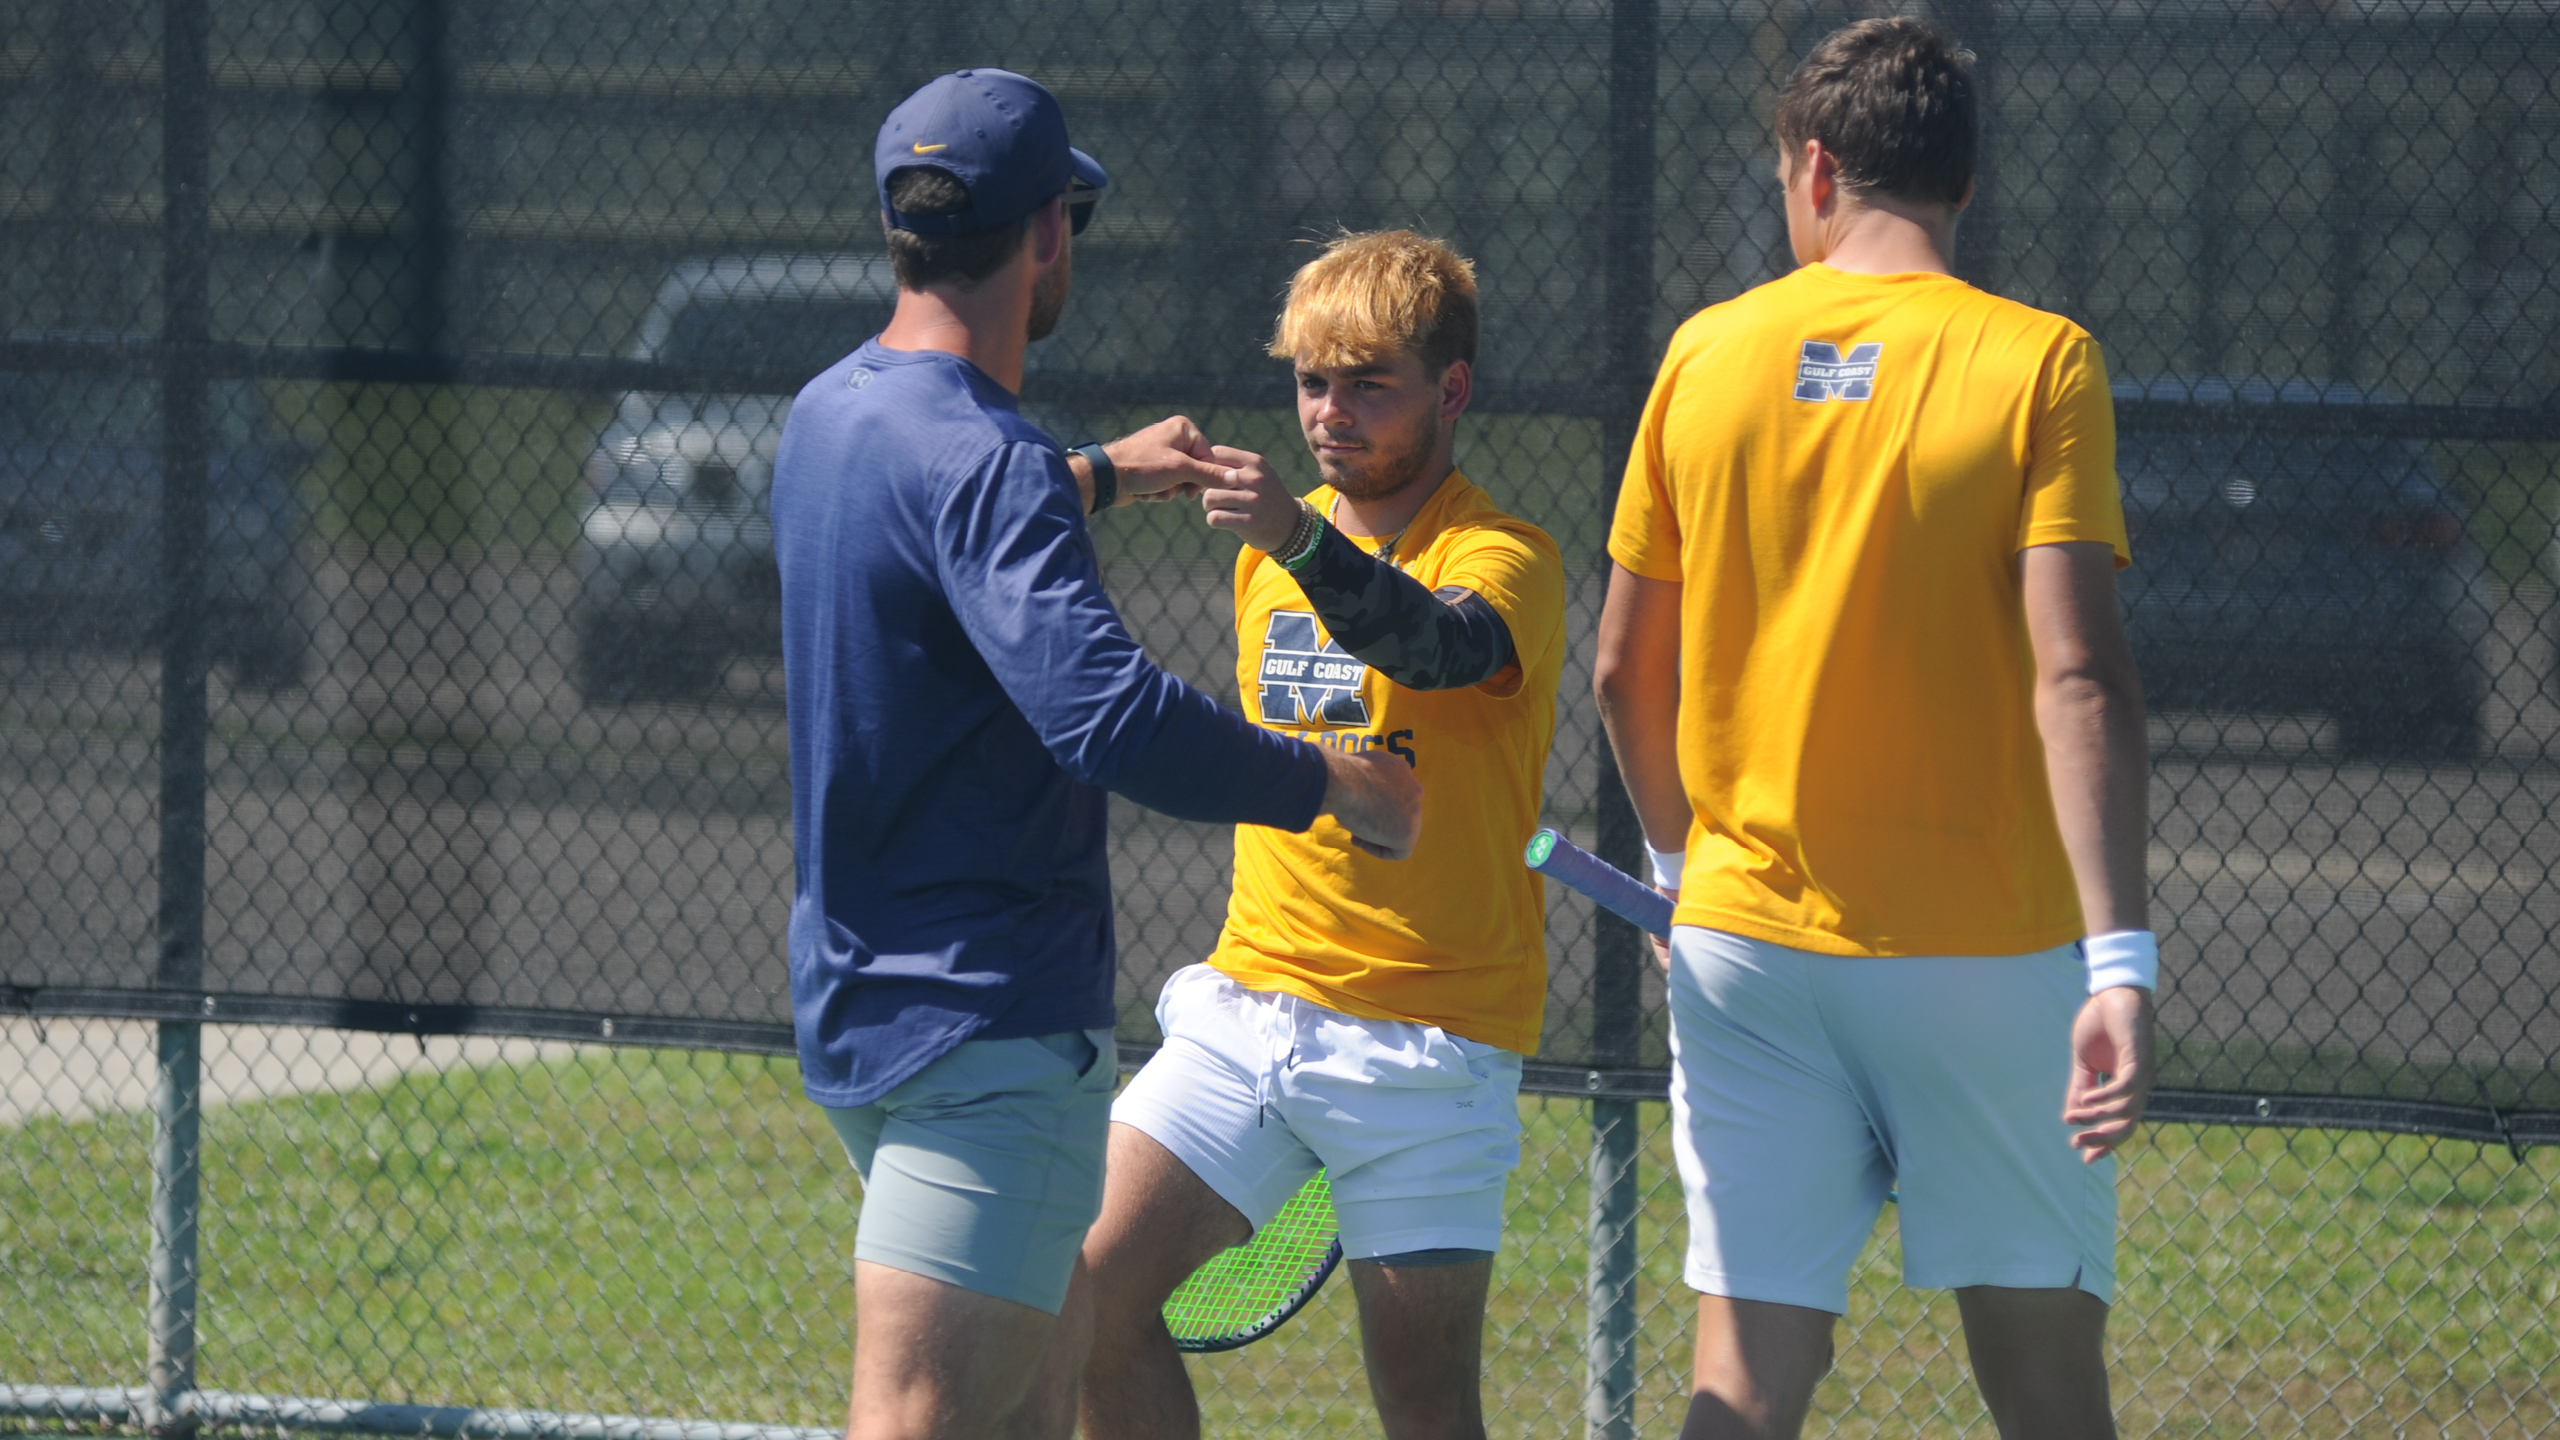 UPDATE: No. 14 Men’s Tennis readying for trip to nationals